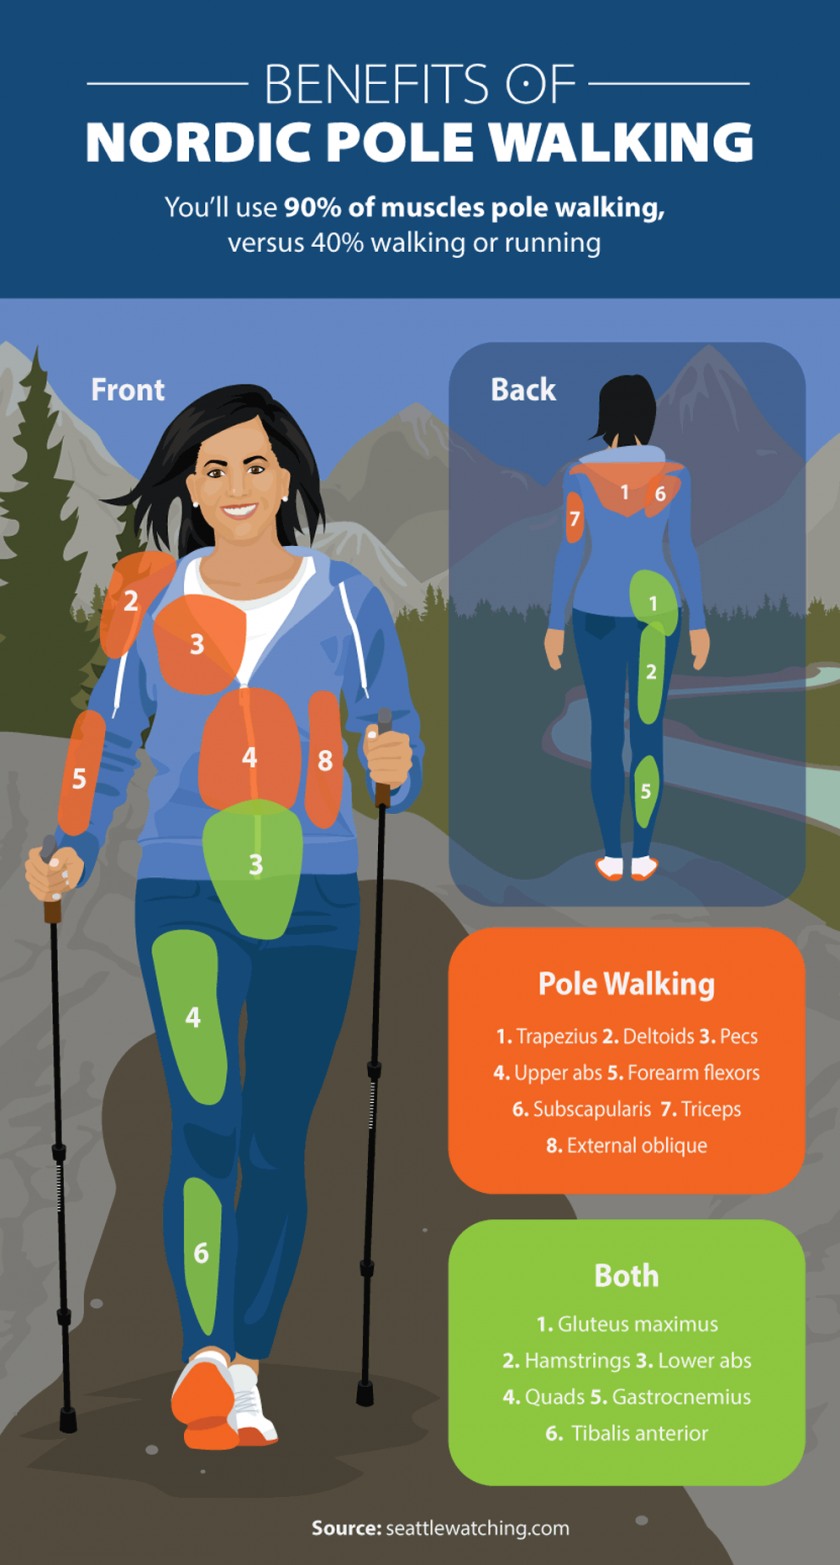 Learn how to use your walking poles and get the most out of them